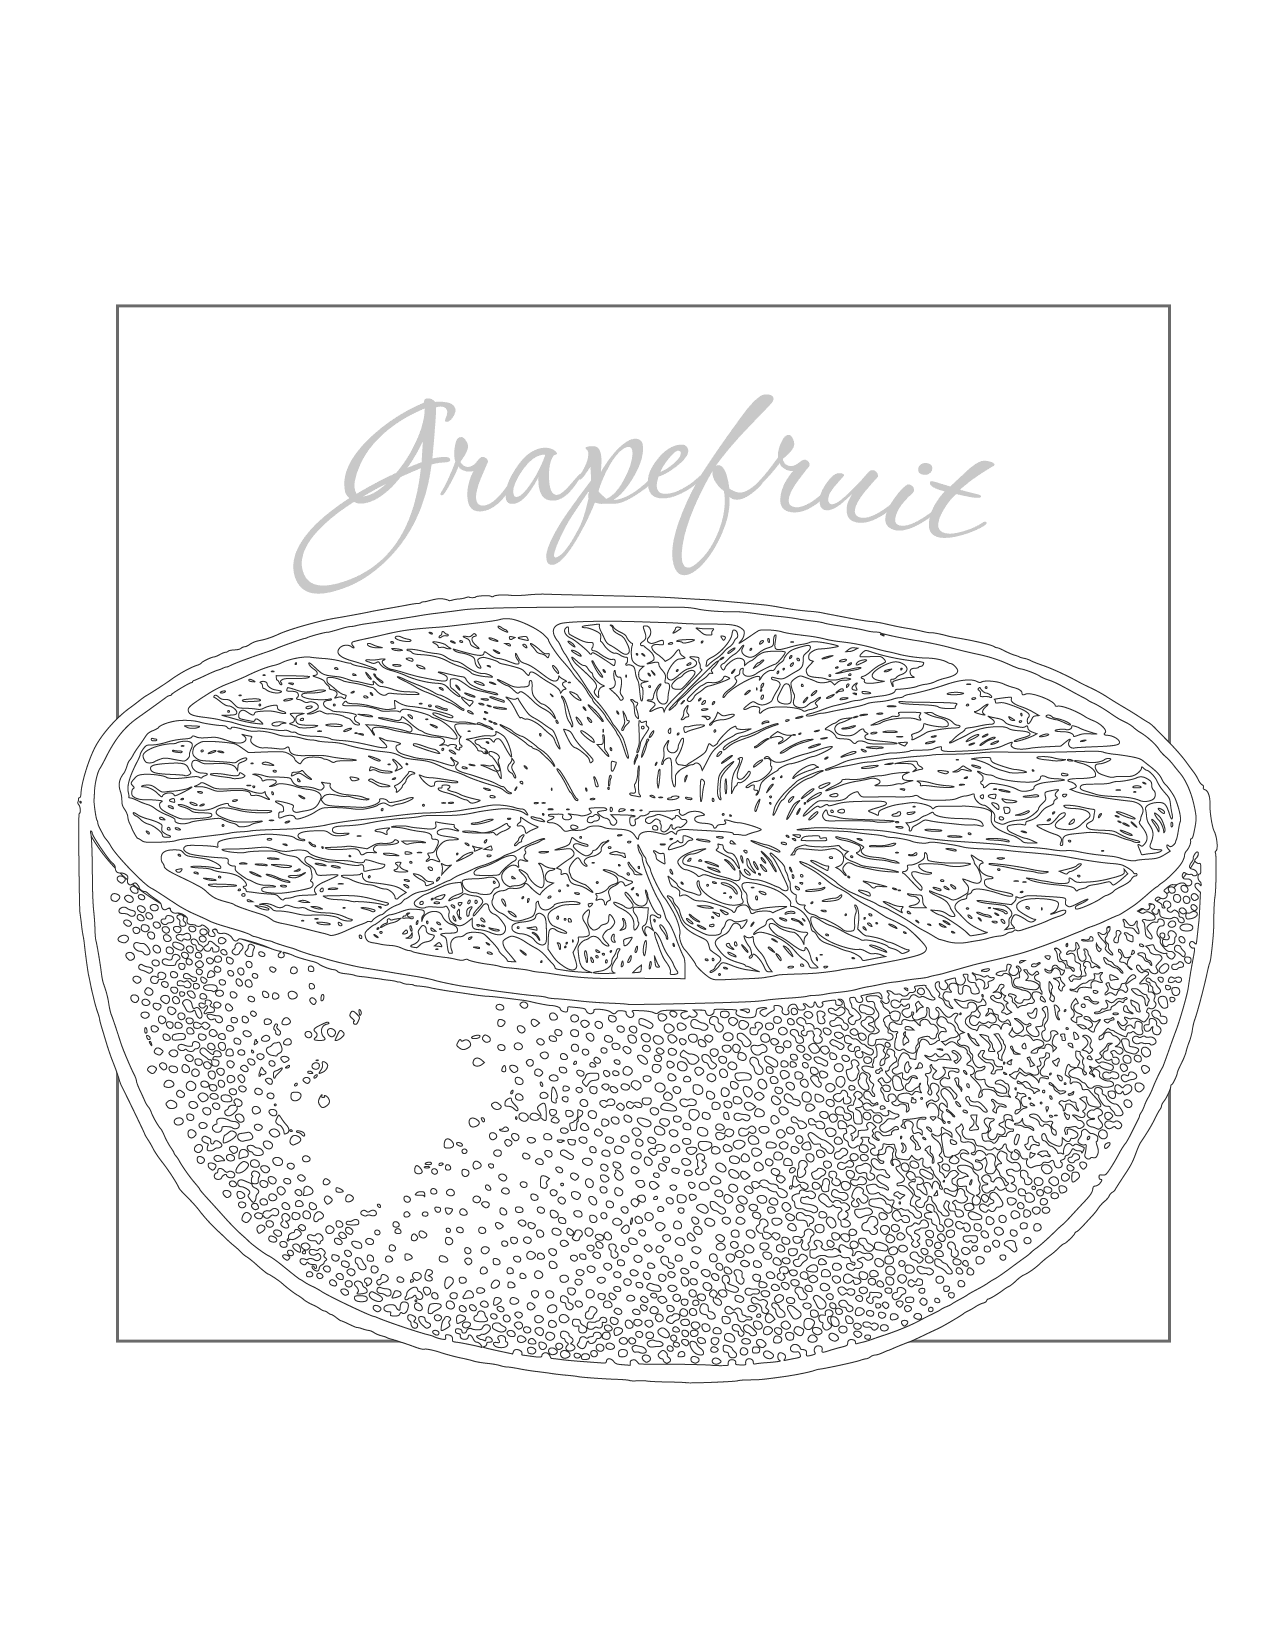 Grapefruit For Breakfast Coloring Page